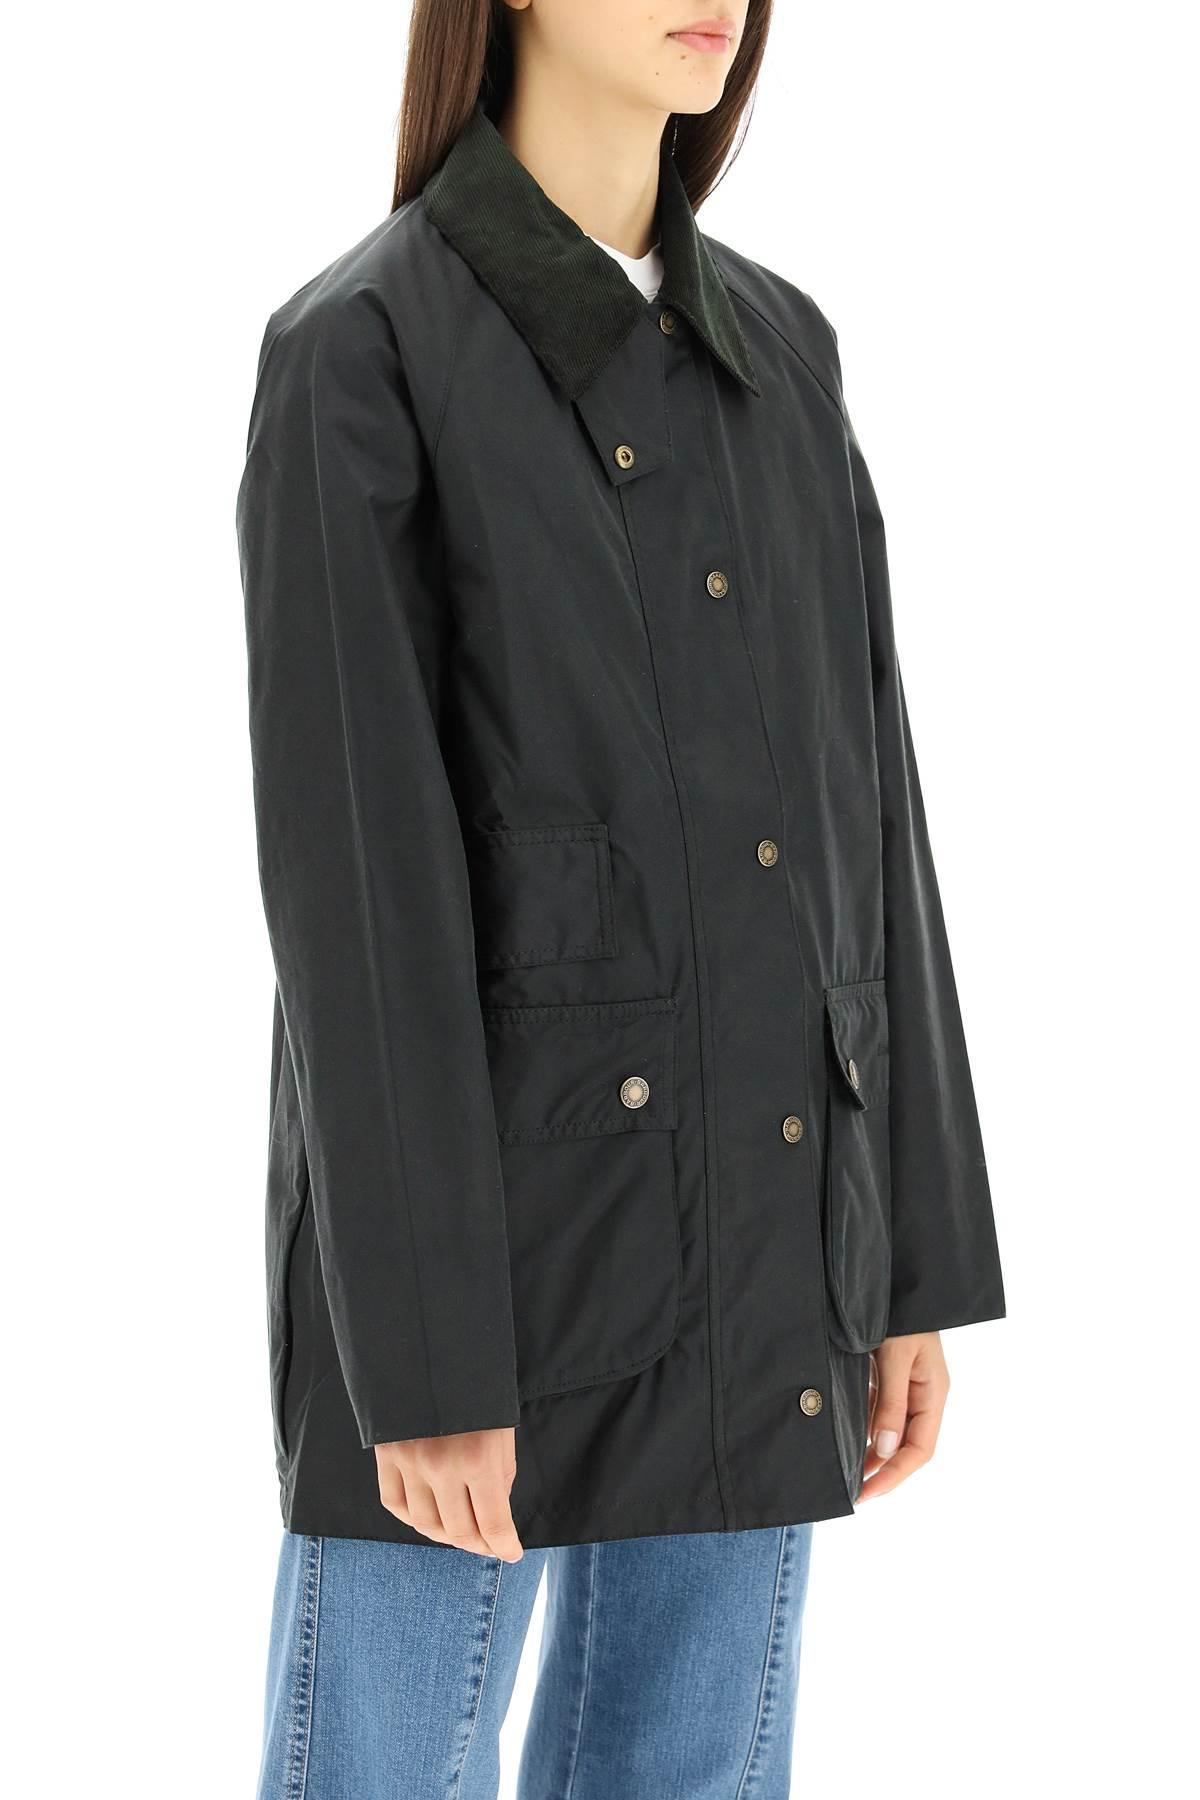 Barbour Tain Wax Jacket in Black | Lyst